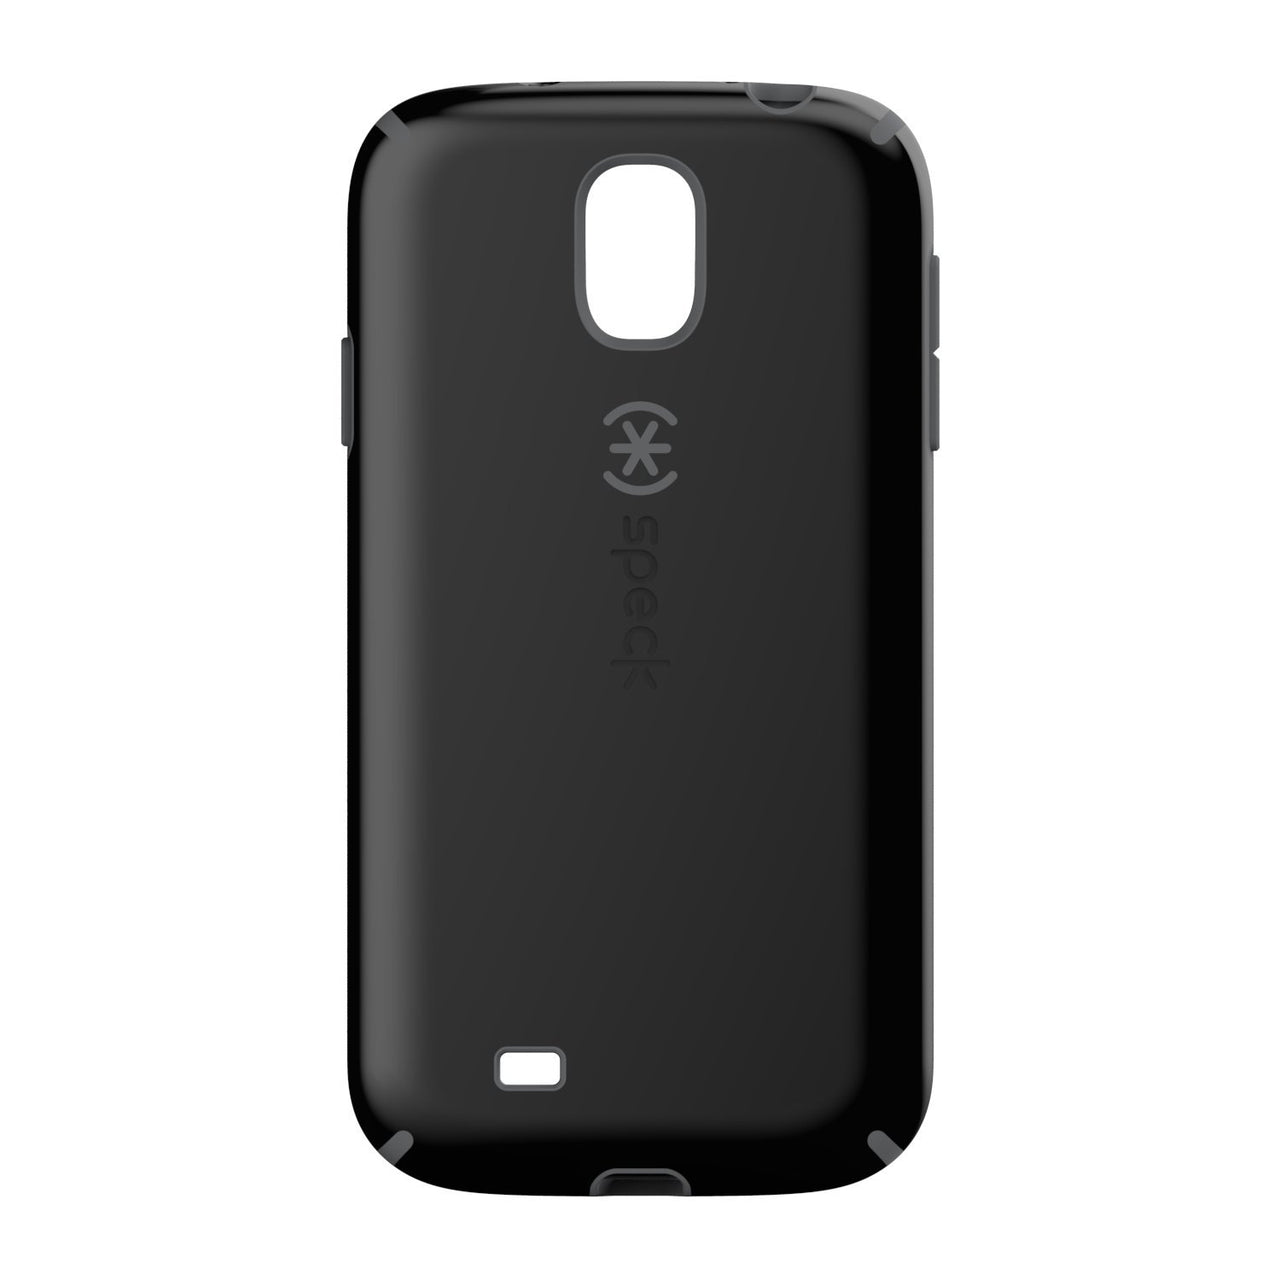 Speck CandyShell Case for Samsung Galaxy S4 - Black / Grey